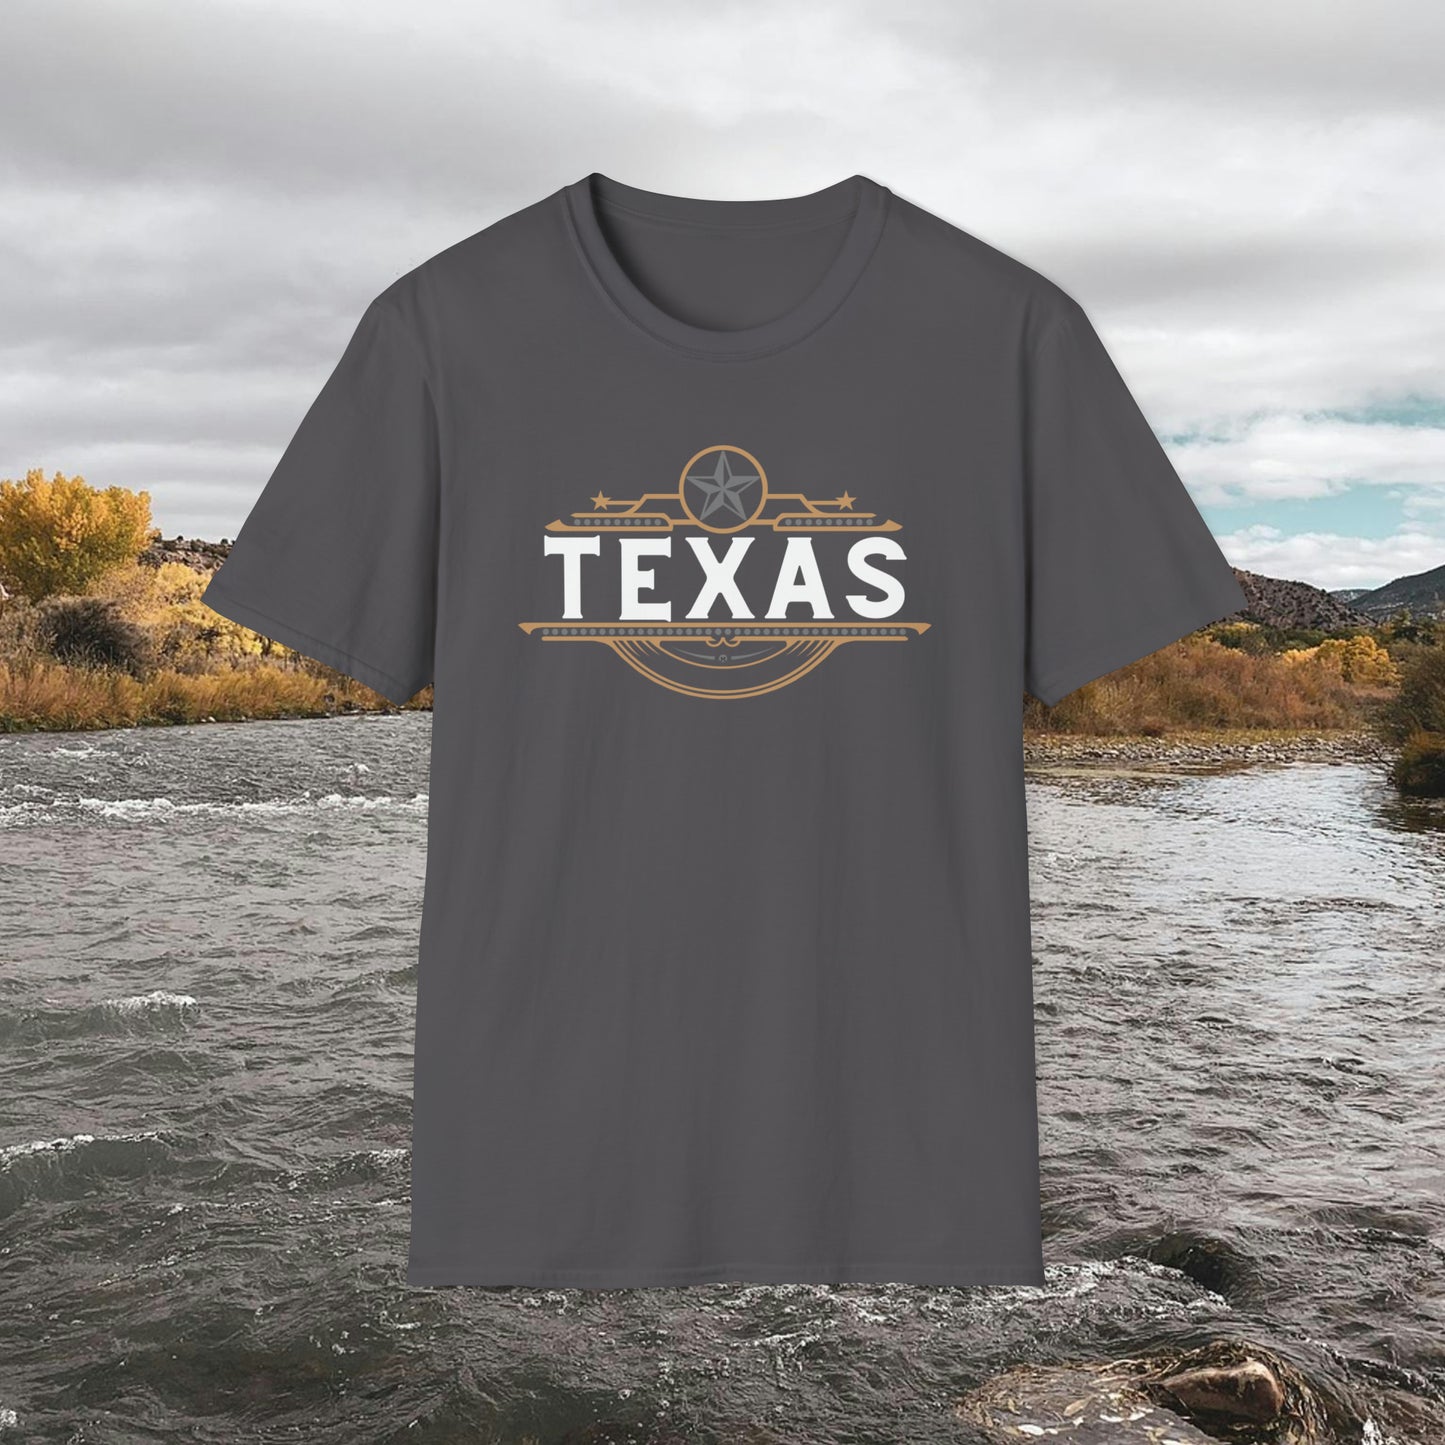 Texas T-shirt Elegant Gold Banner, Silver Star, Accents on a beautiful Graphic Softstyle T-Shirt Unisex Designs by MII